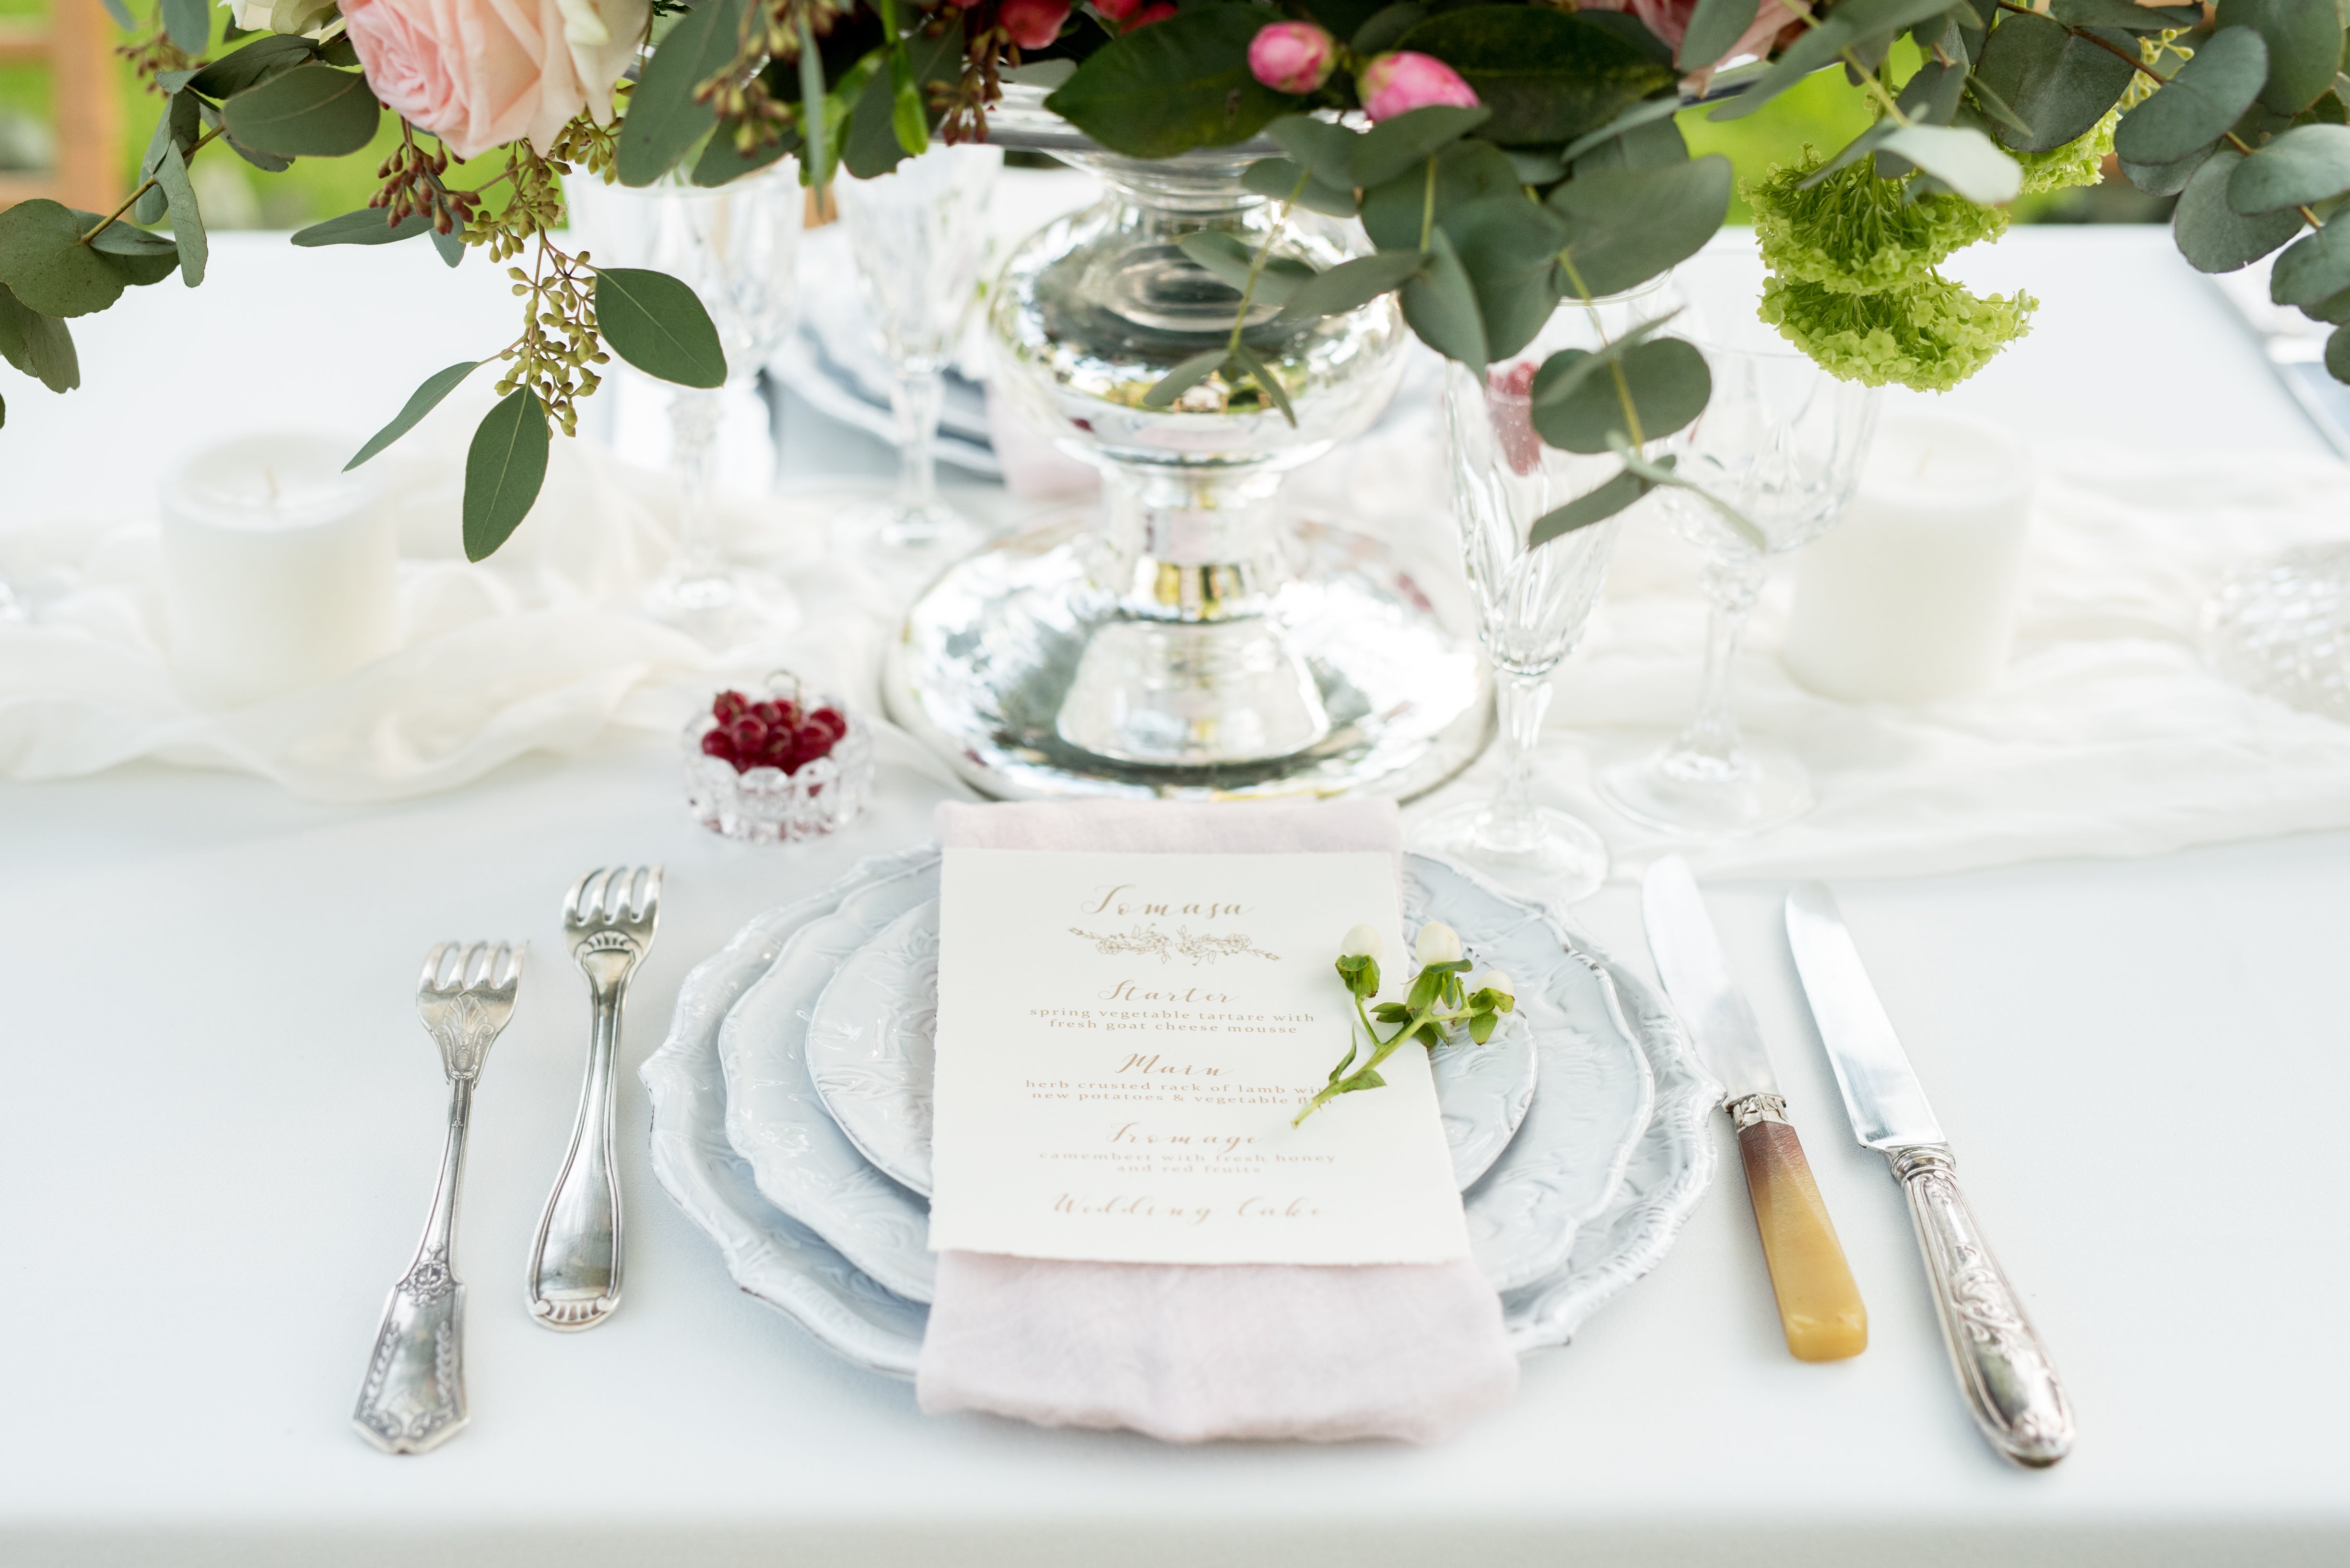 "CARRON Tableware Rental: The Perfect Touch for Your Wedding - Discontinued Service, Classic Orders Available